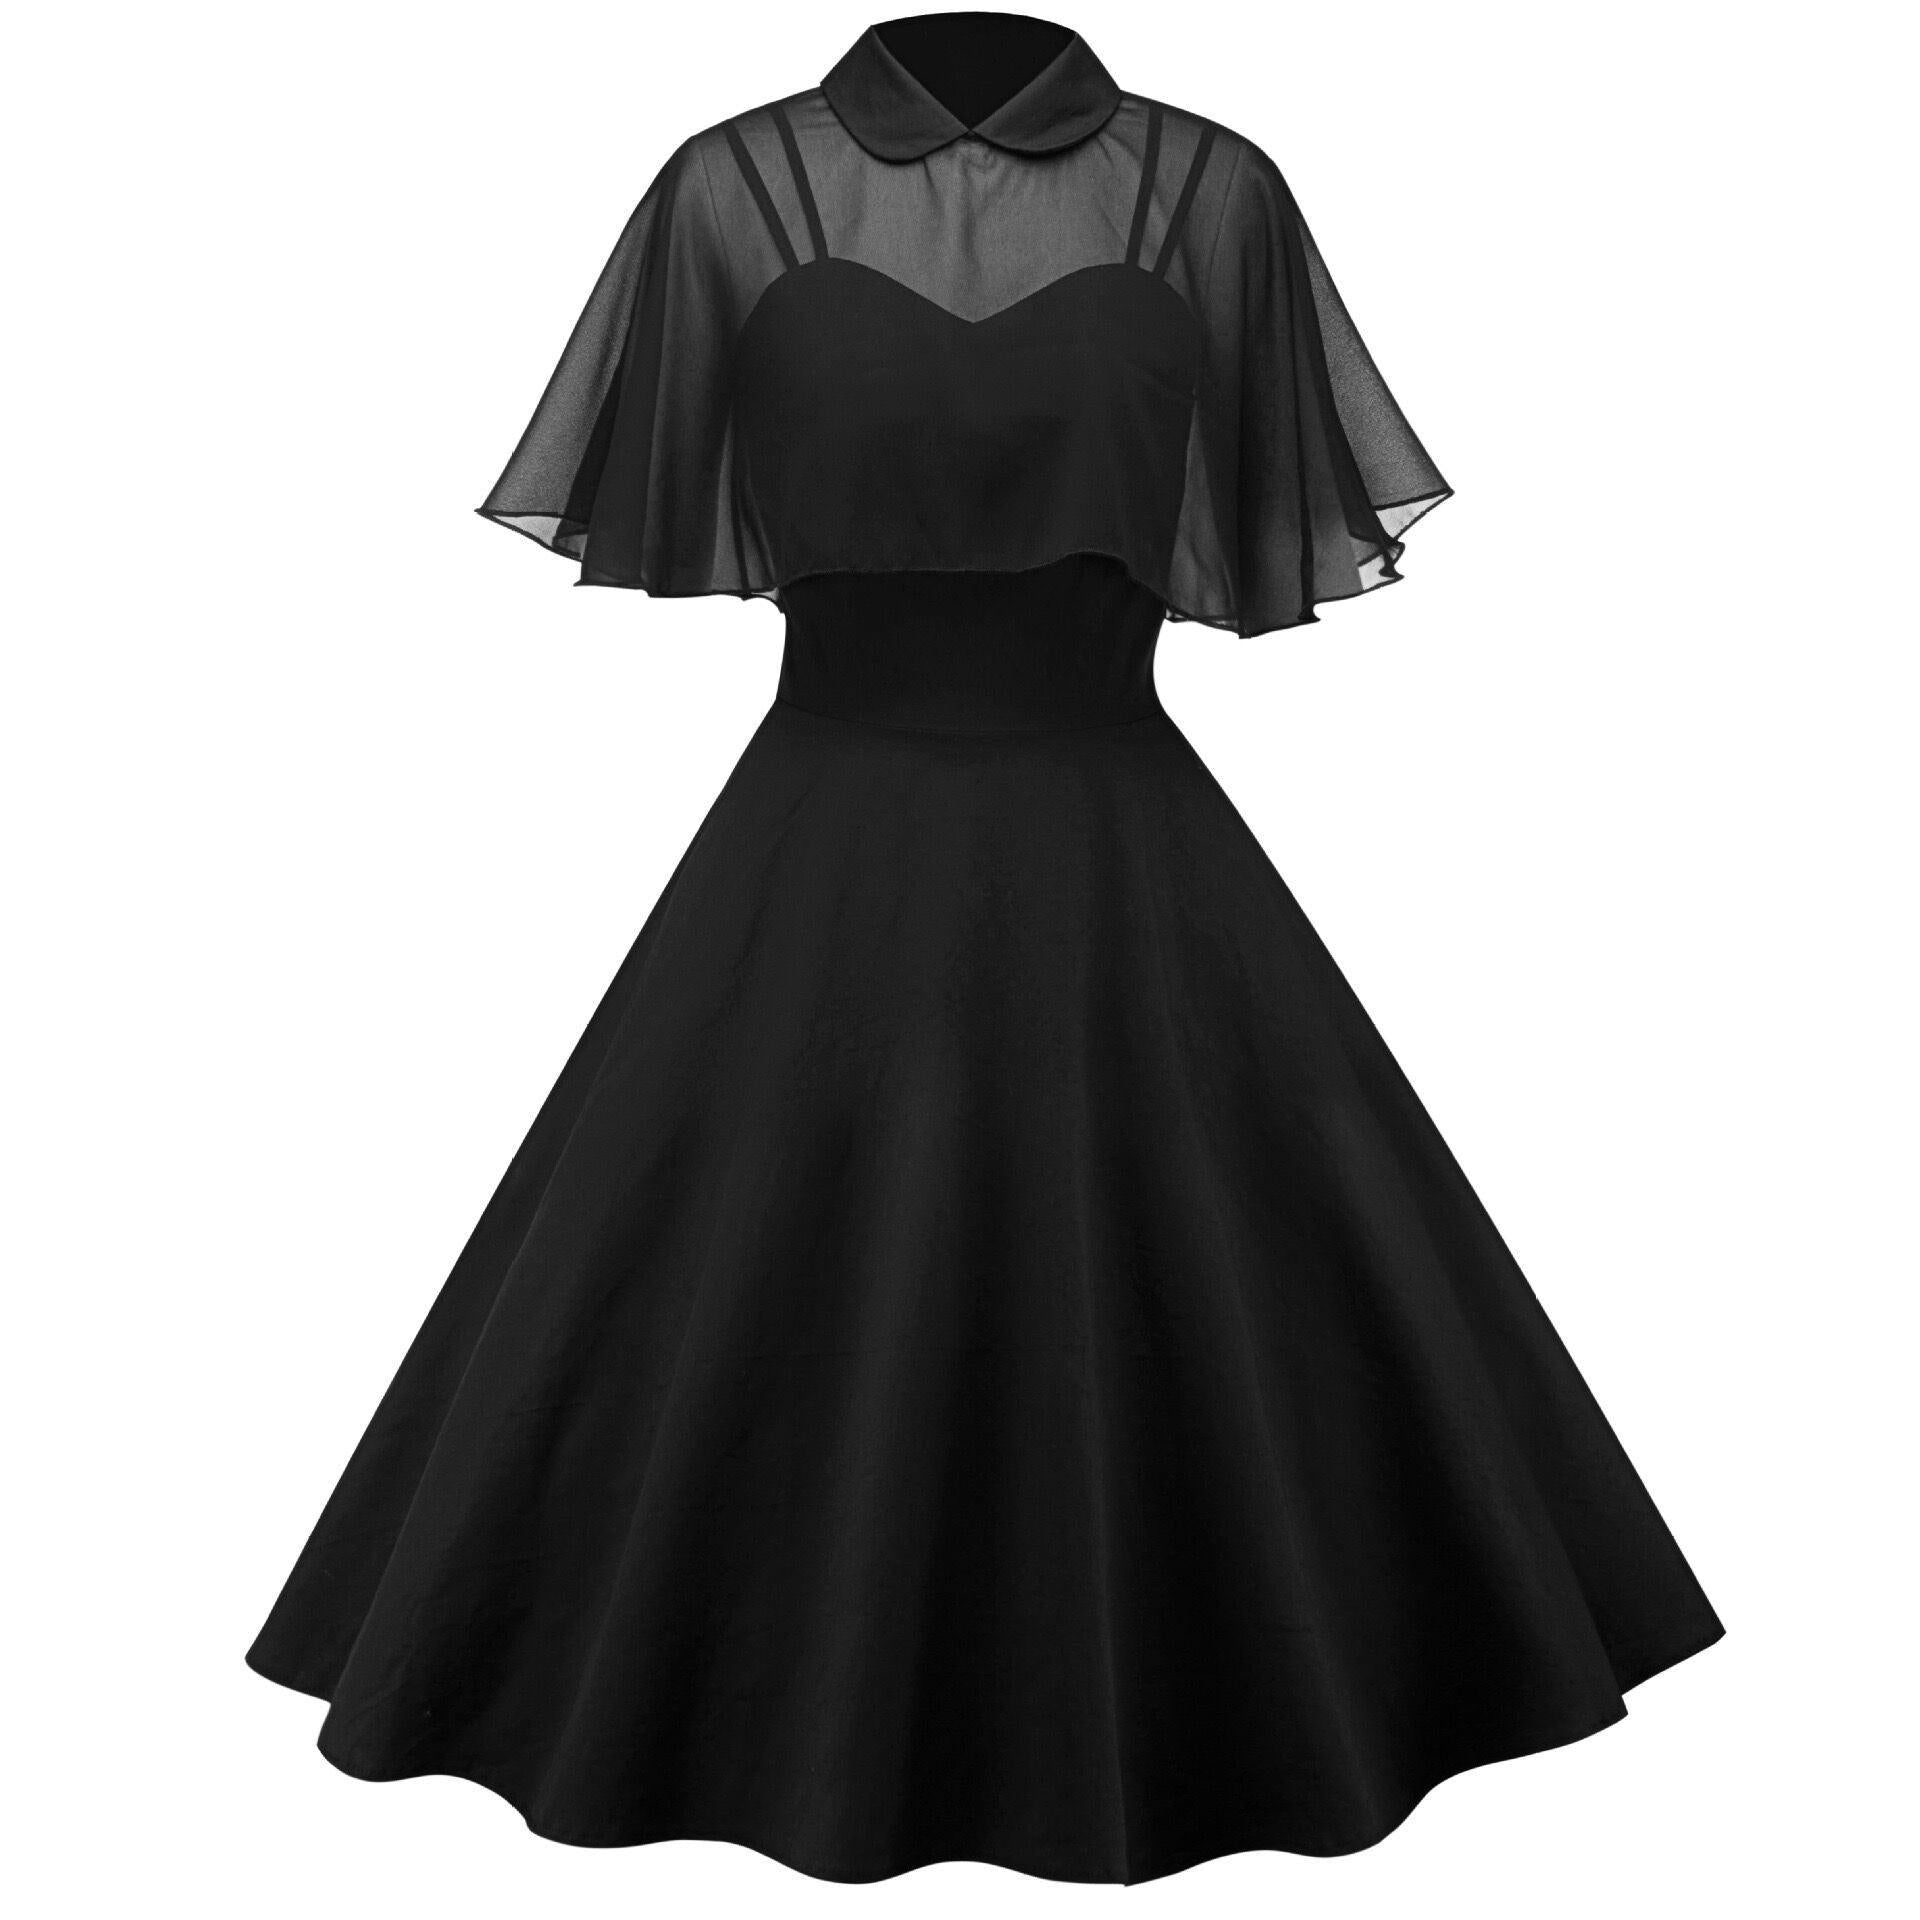 Cape Dress - GothBB 2022 free shipping available